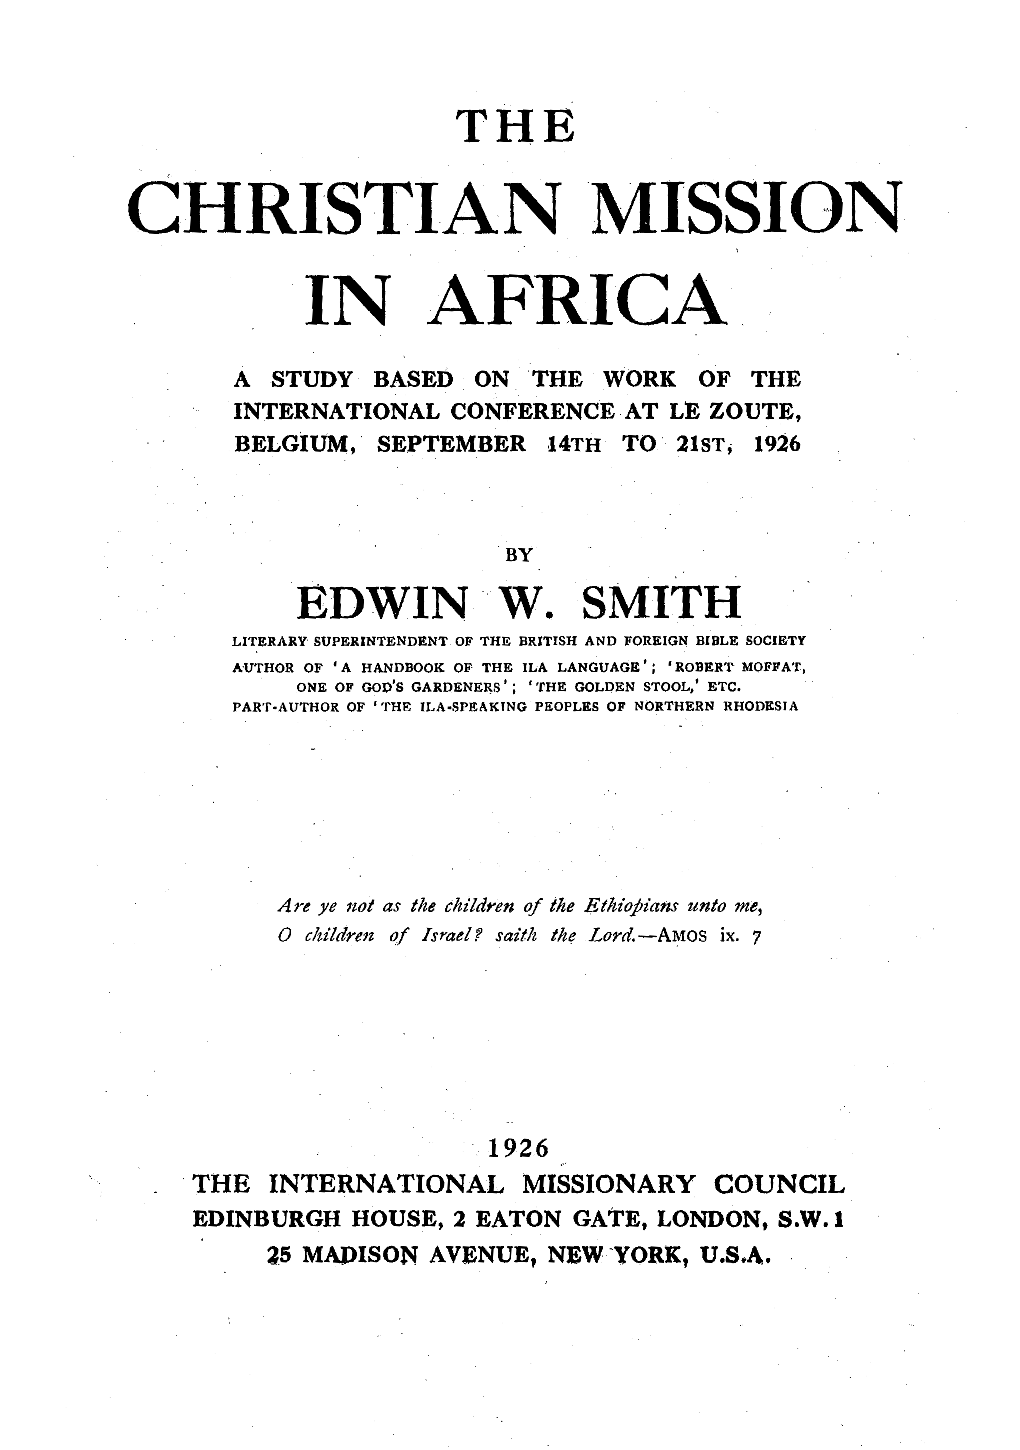 Christian Mission in Africa